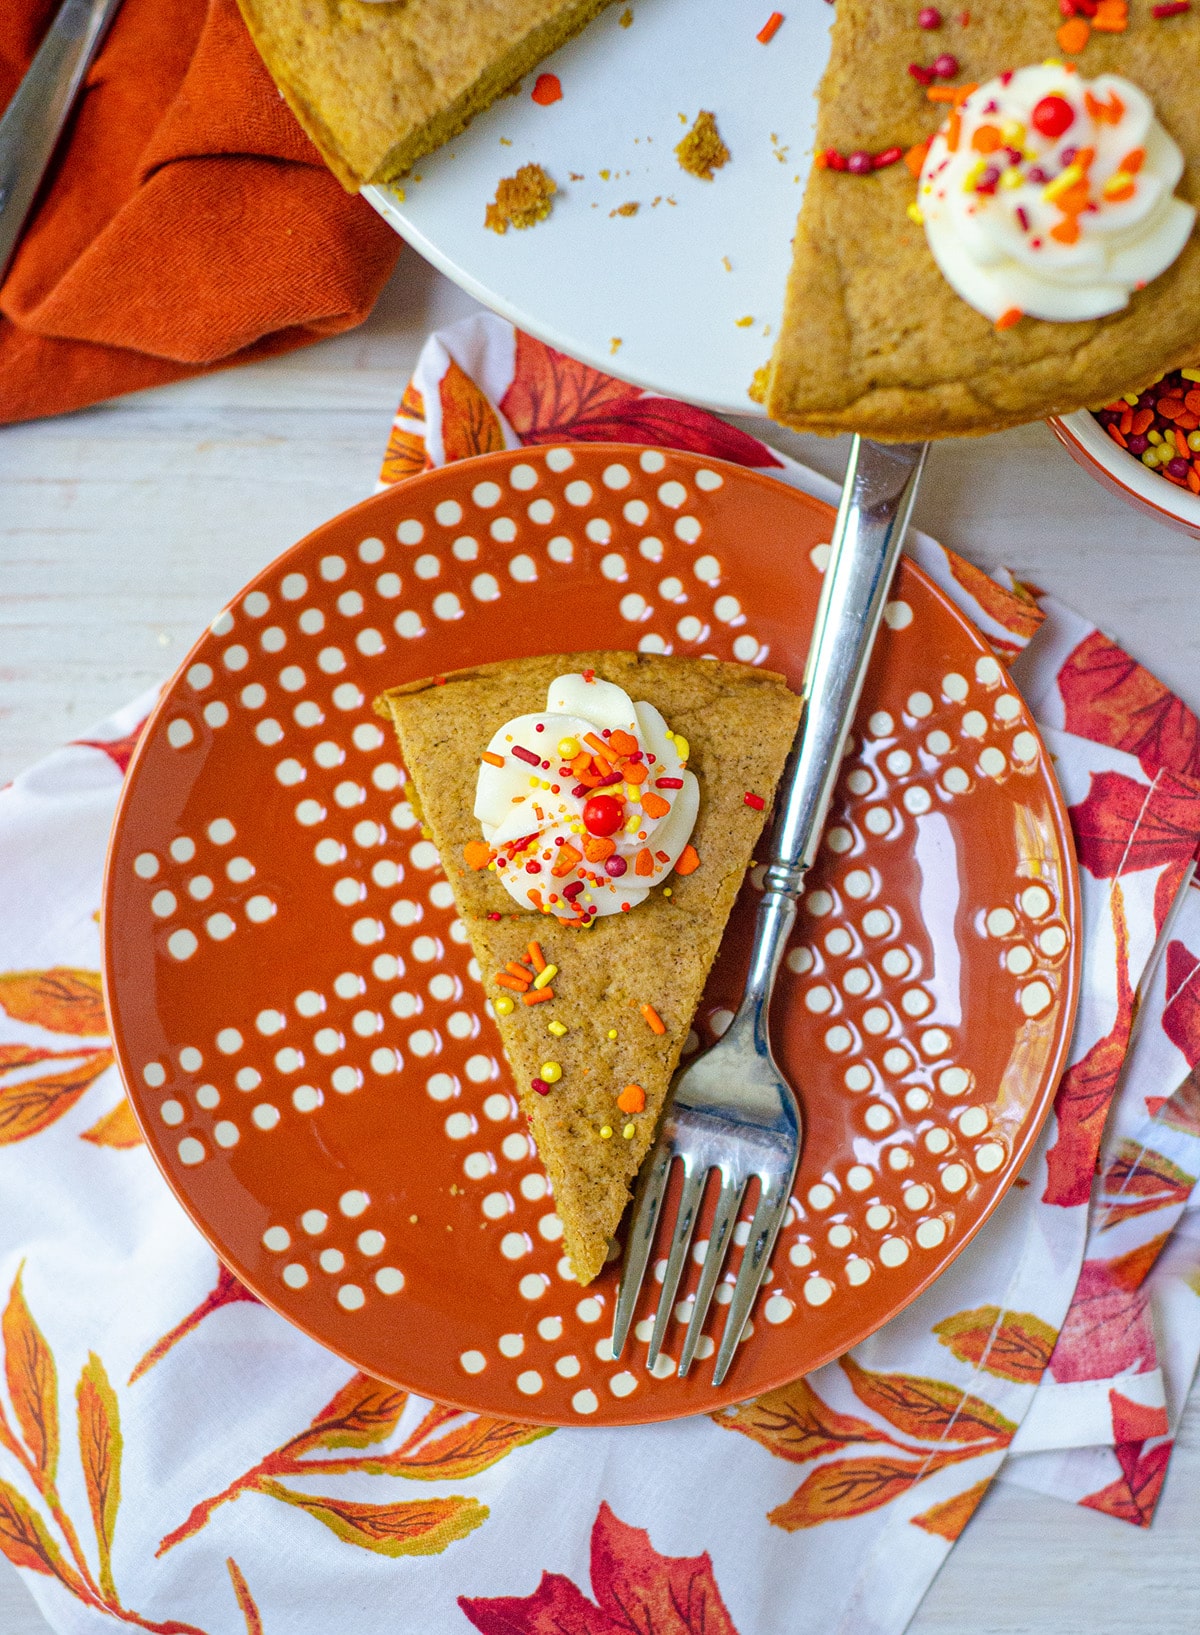 A soft and flavorful spiced cookie cake. The perfect treat for a fall birthday! via @frshaprilflours